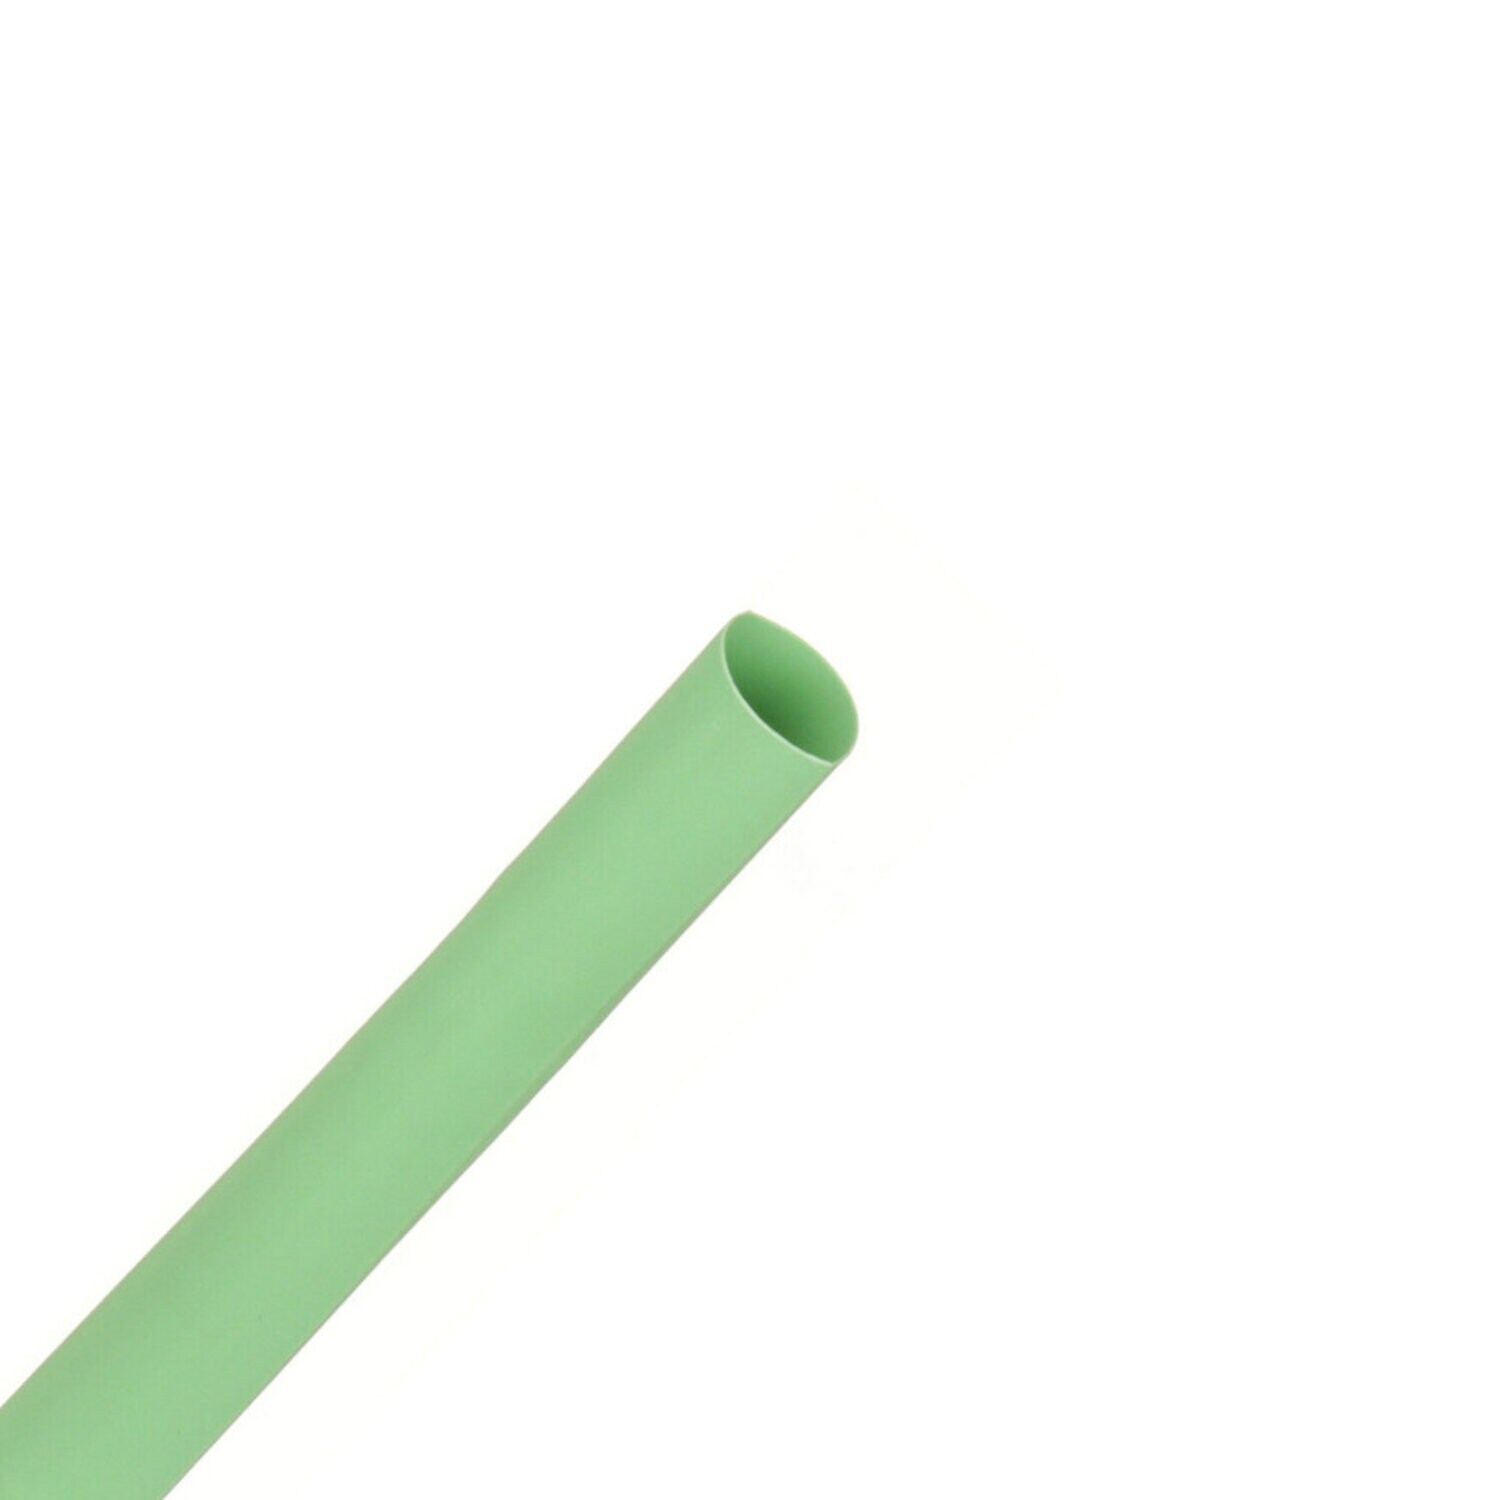 7000133627 - 3M Heat Shrink Thin-Wall Tubing FP-301-1/2-48"-Green-100 Pcs, 48 in
Length sticks, 100 pieces/case